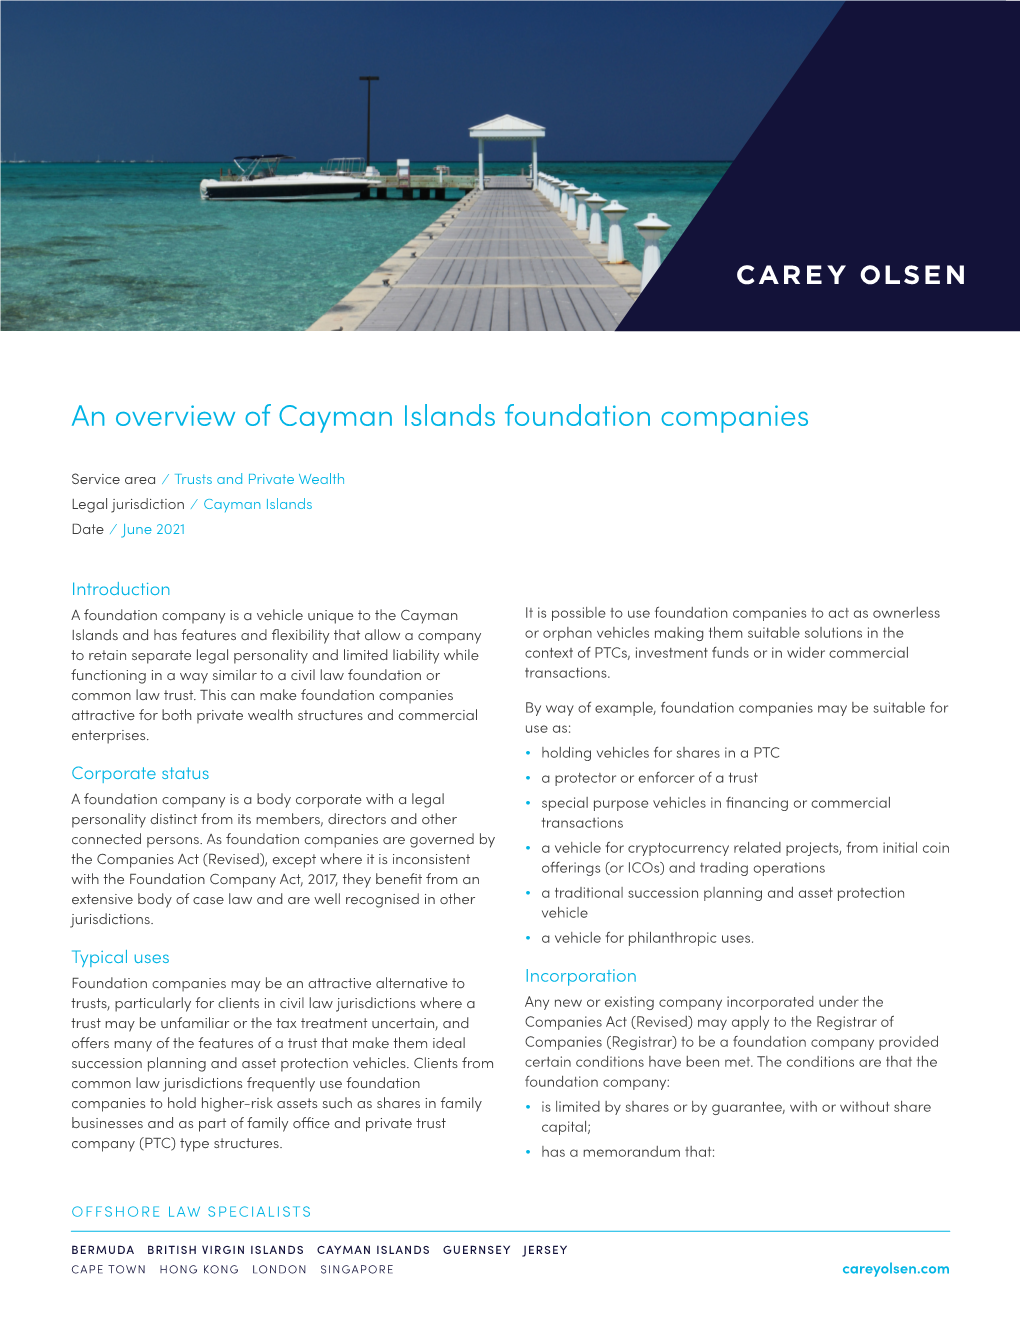 An Overview of Cayman Islands Foundation Companies